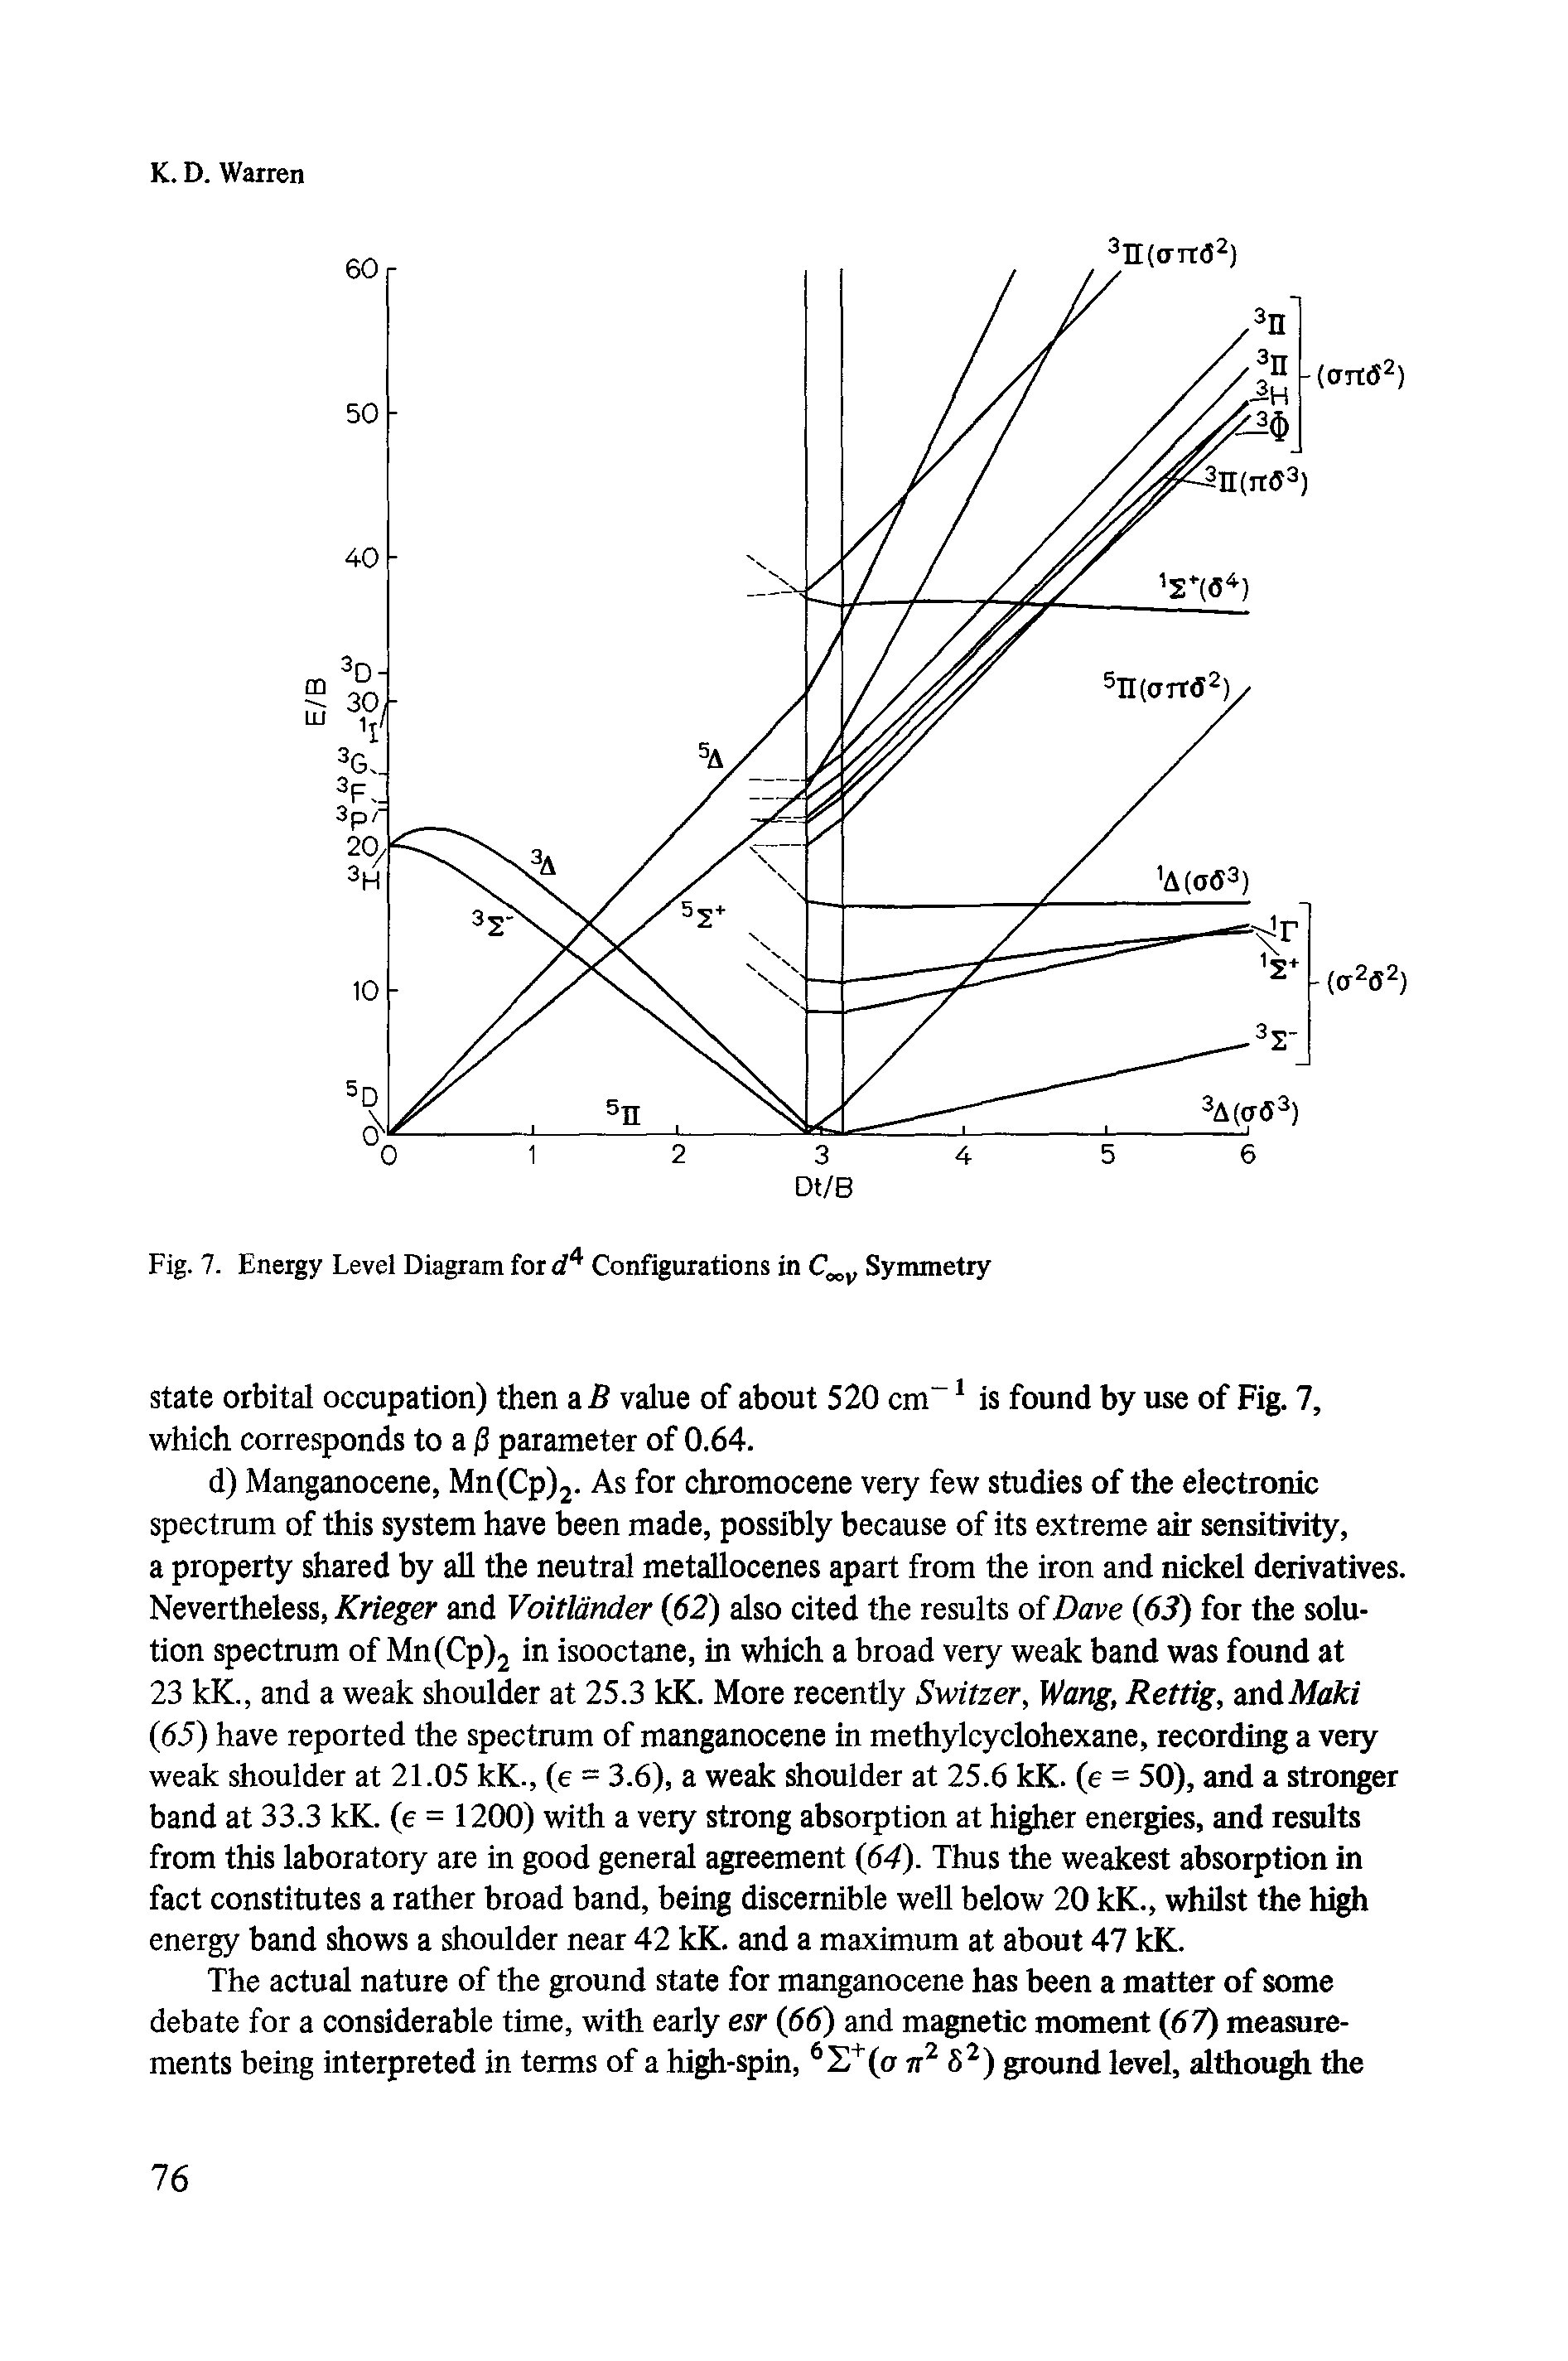 Fig. 7. Energy Level Diagram ford4 Configurations in C Symmetry...